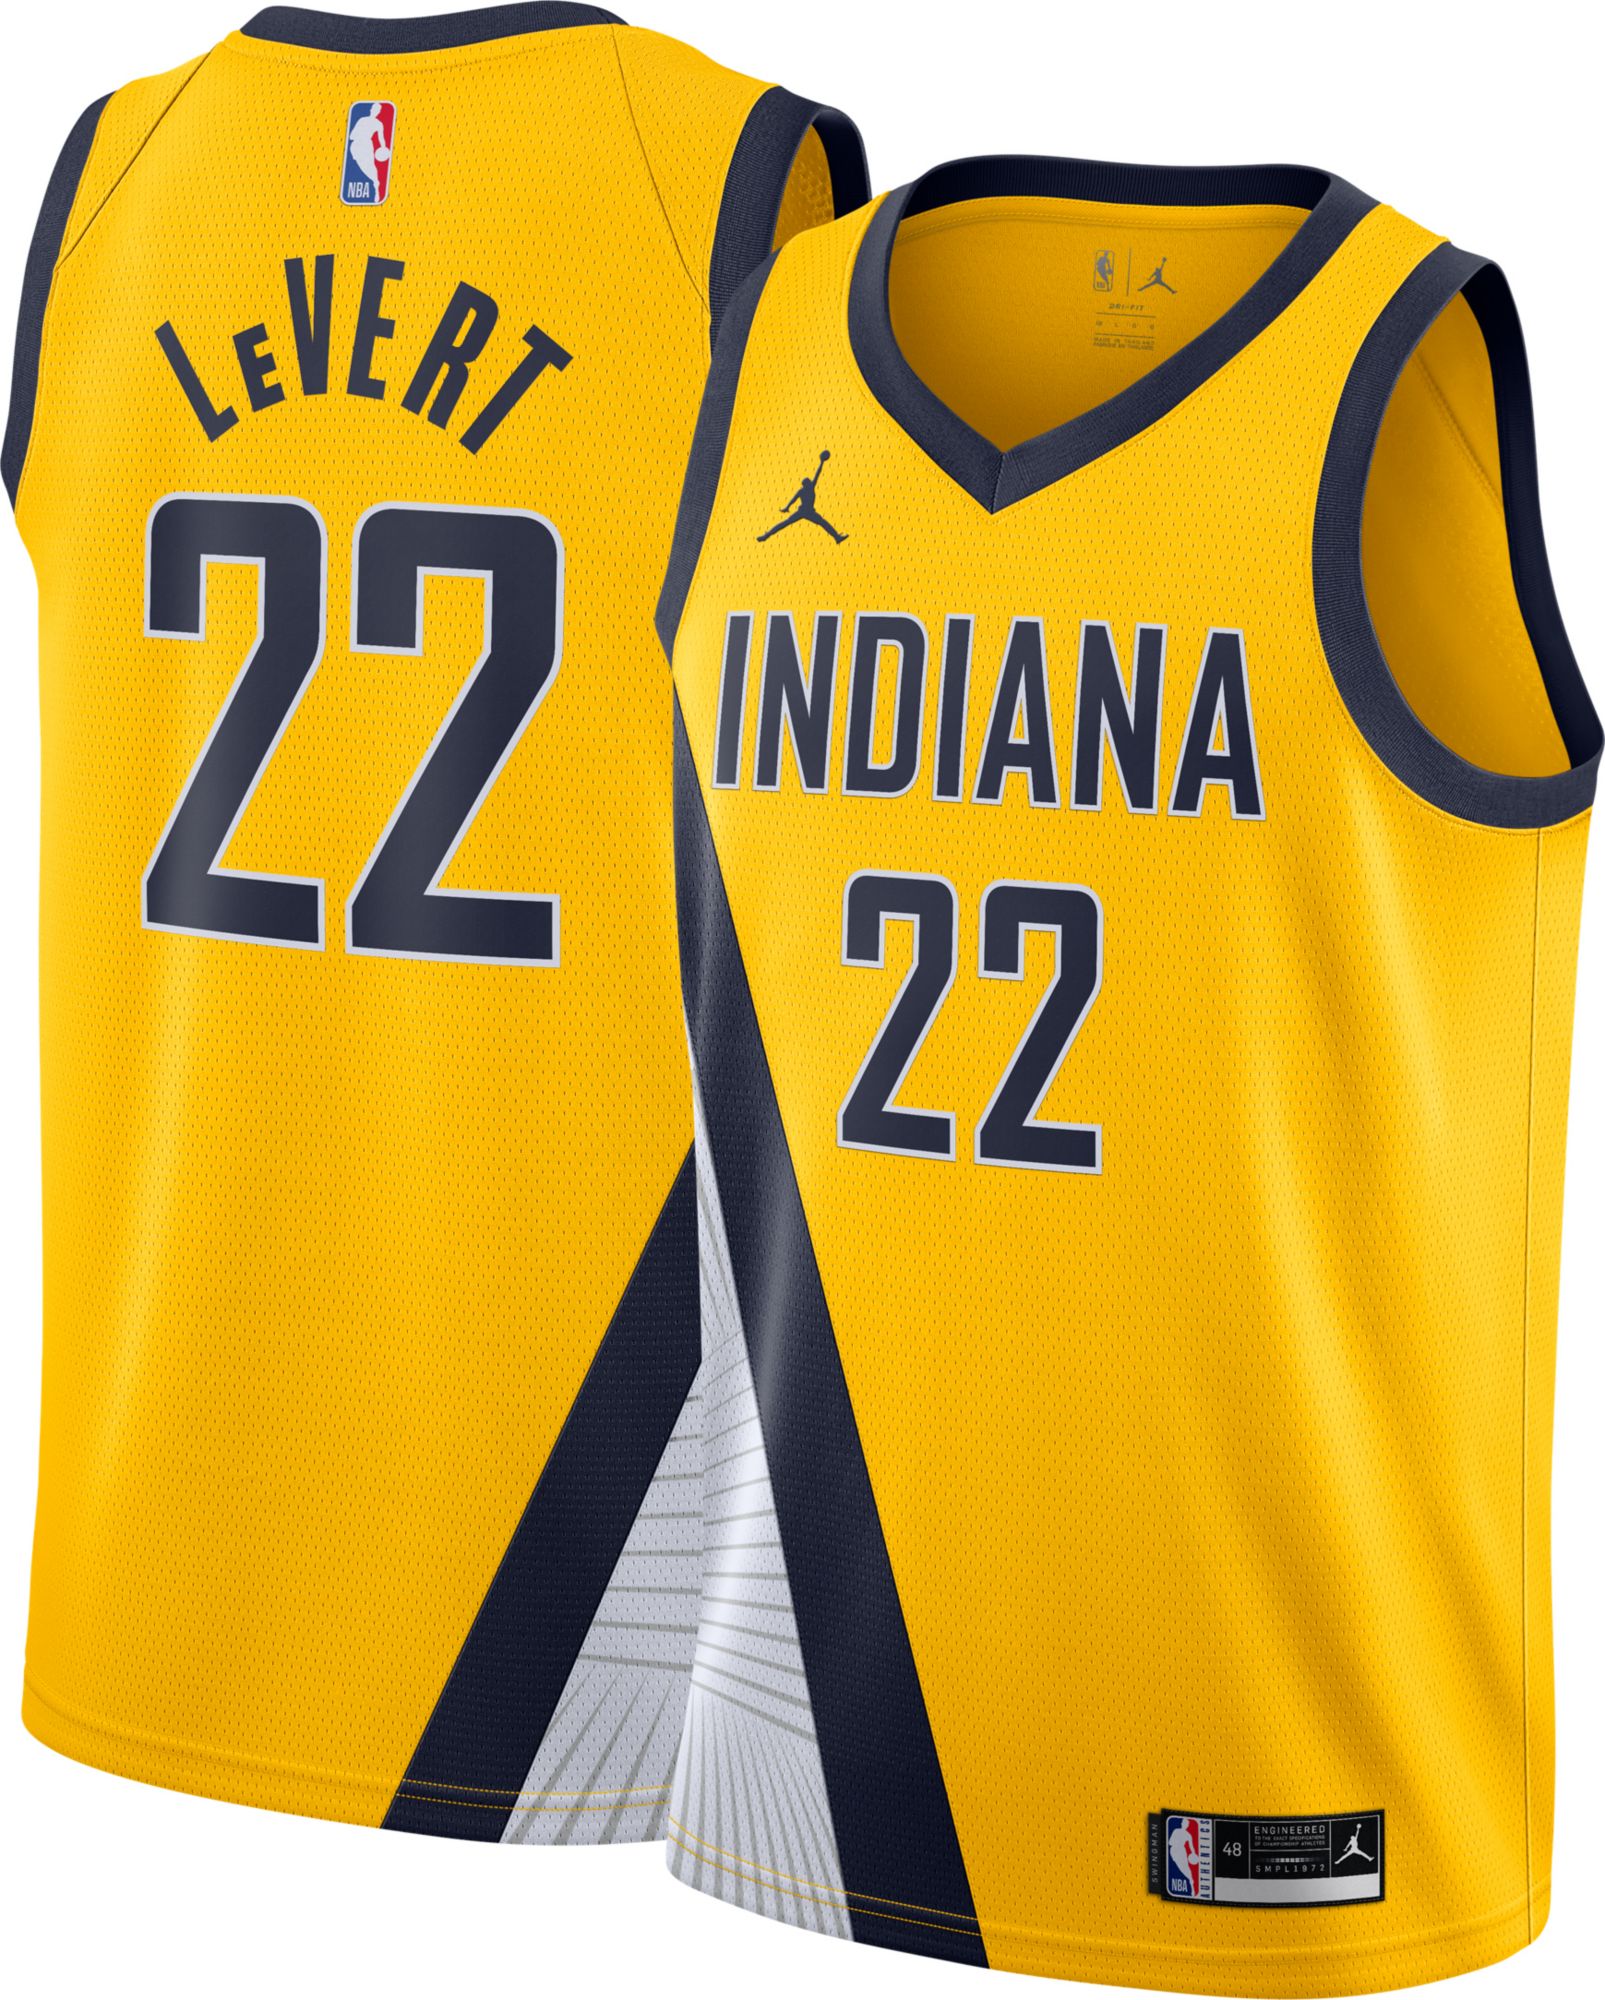 Nike / Men's 2021-22 City Edition Indiana Pacers Caris LeVert #22